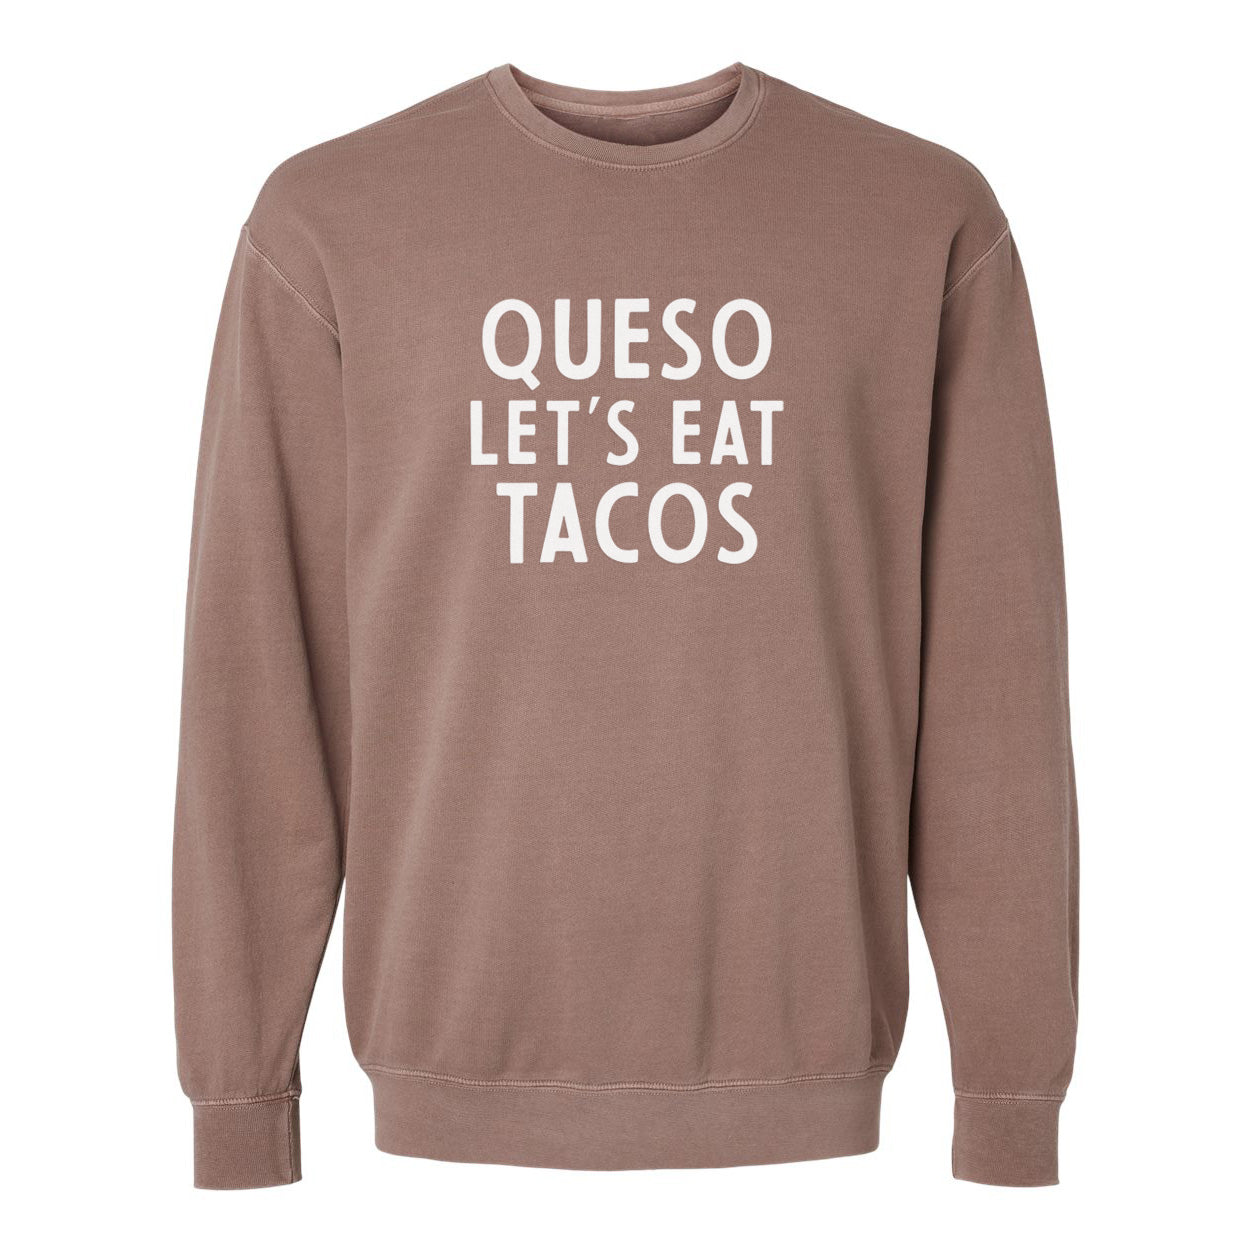 Queso Let's Eat Tacos Washed Sweatshirt